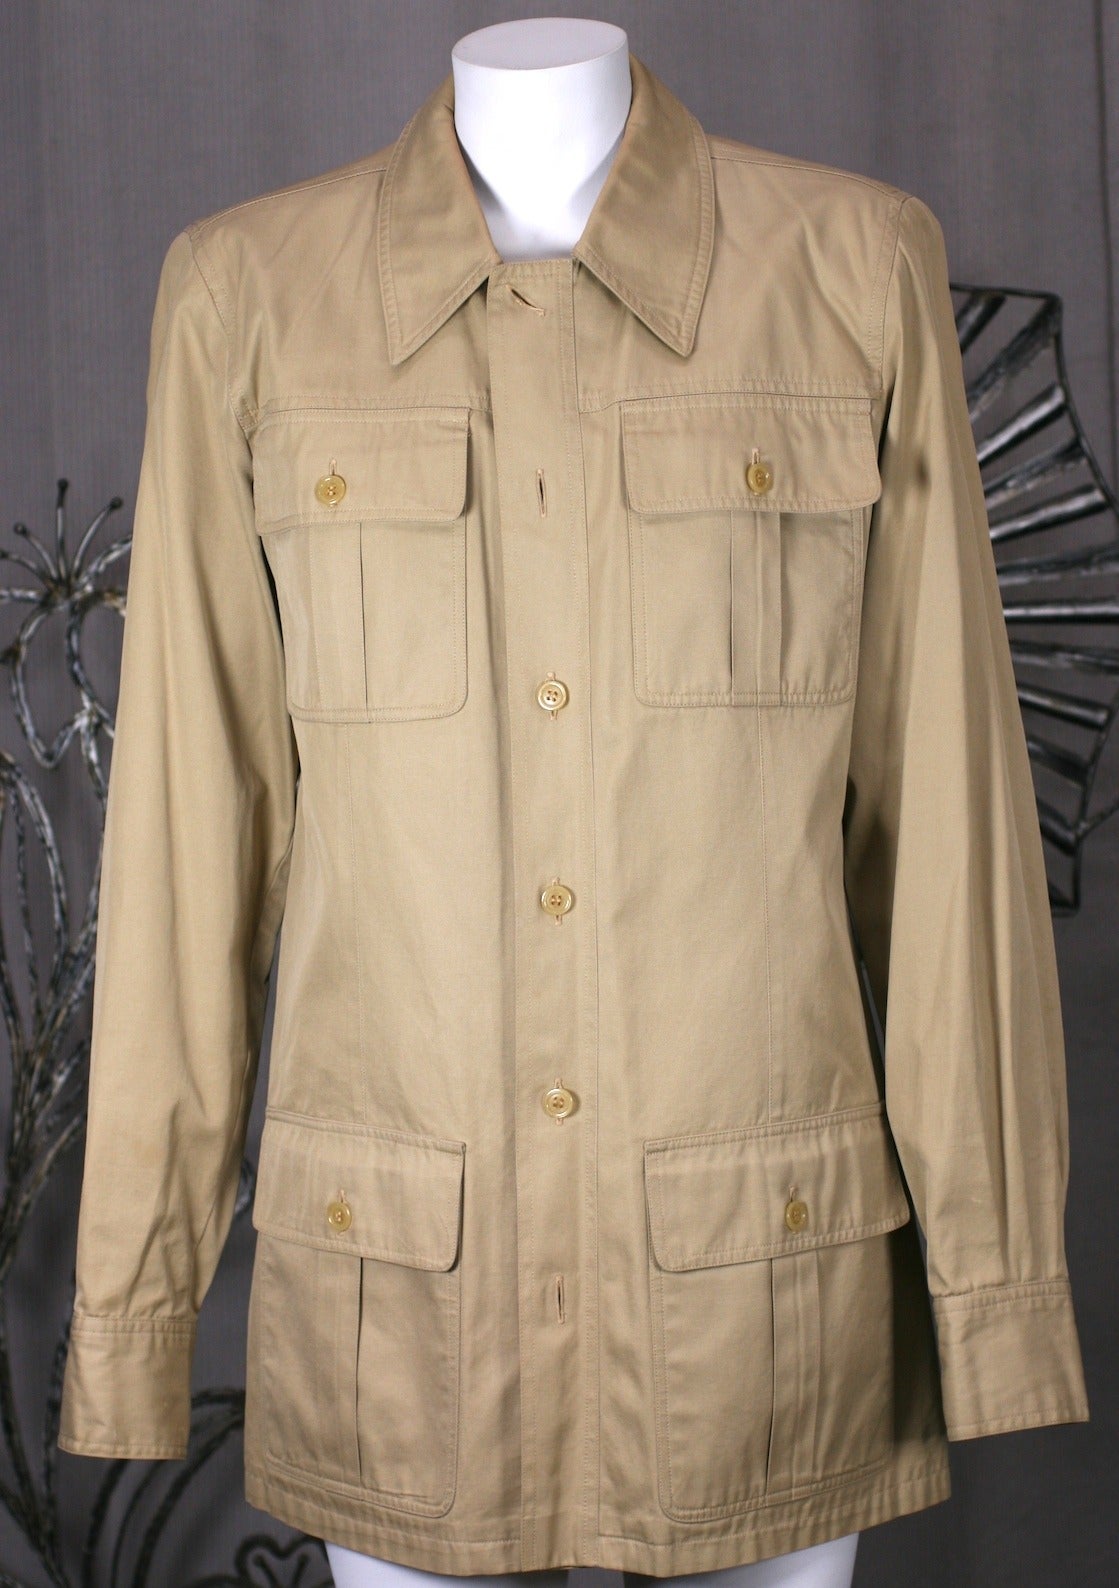 Early Yves Saint Laurent Mens Safari from the 1970's. The Safari became one of  YSL's most iconic designs in khaki cotton twill. 
The men's version of this style is quite rare. Shirt Jacket with 4 patch pleated packets and front button opening.